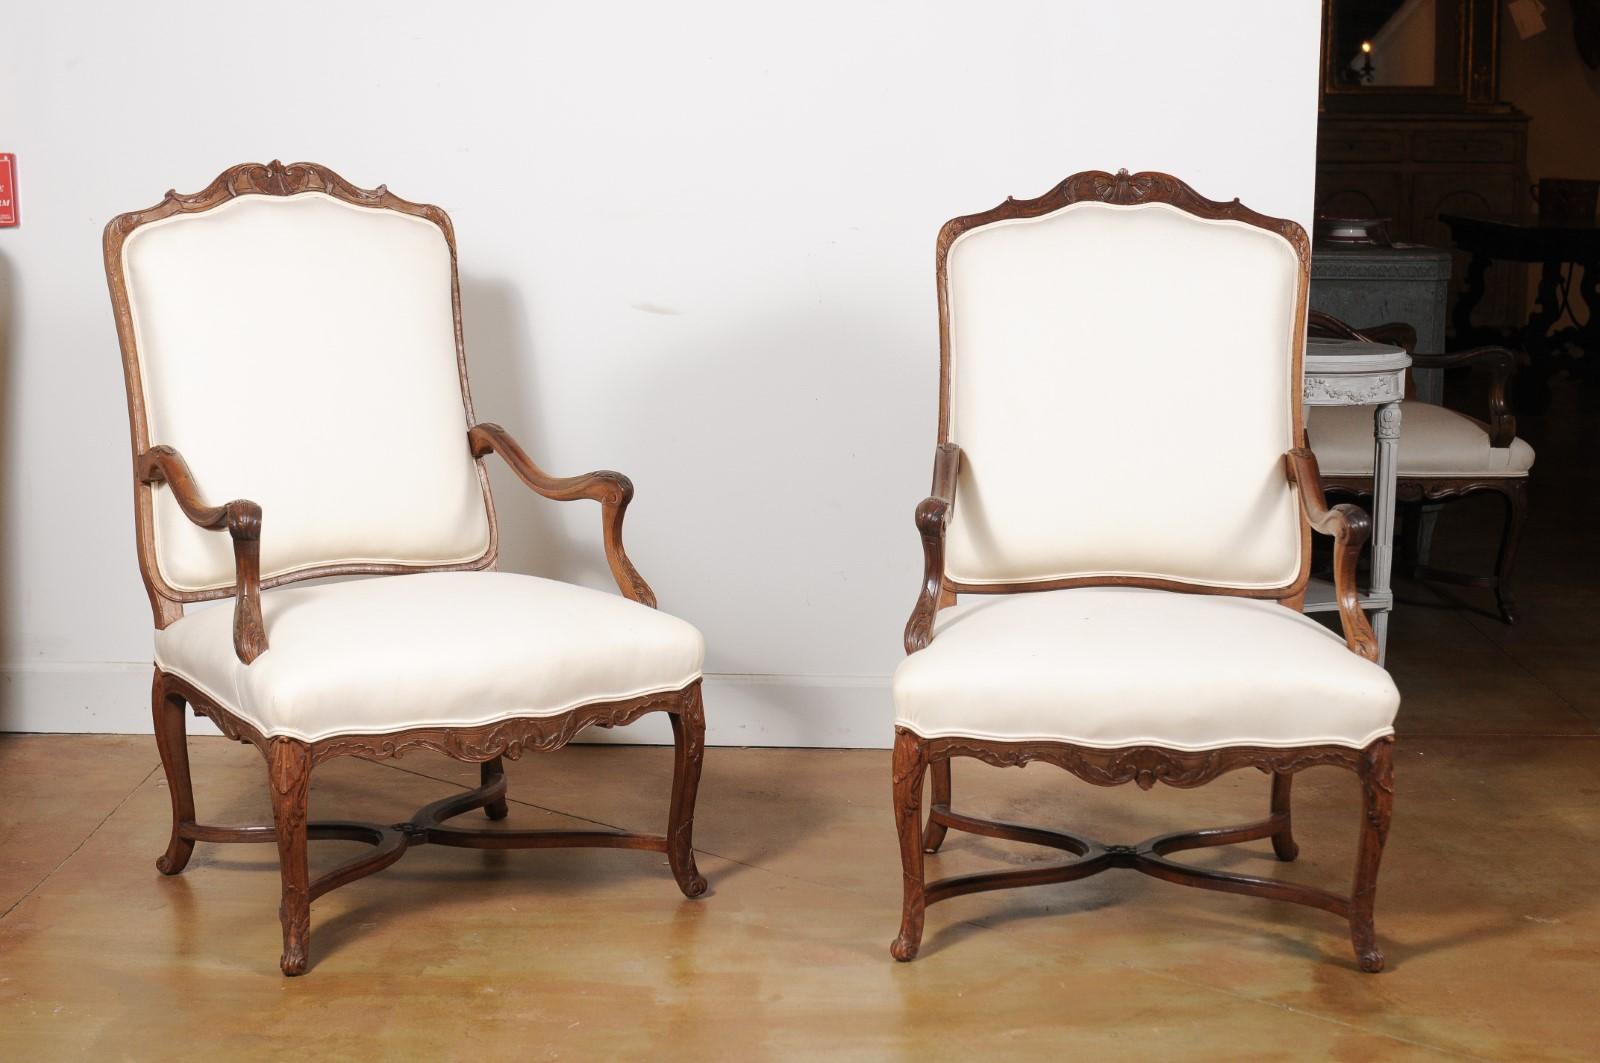 A pair of French Régence period walnut armchairs from the early 18th century, with carved crest, scrolling arms, cabriole legs and upholstery. Born in France during the transition of power between the Sun King and his heir Louis XV who was still too